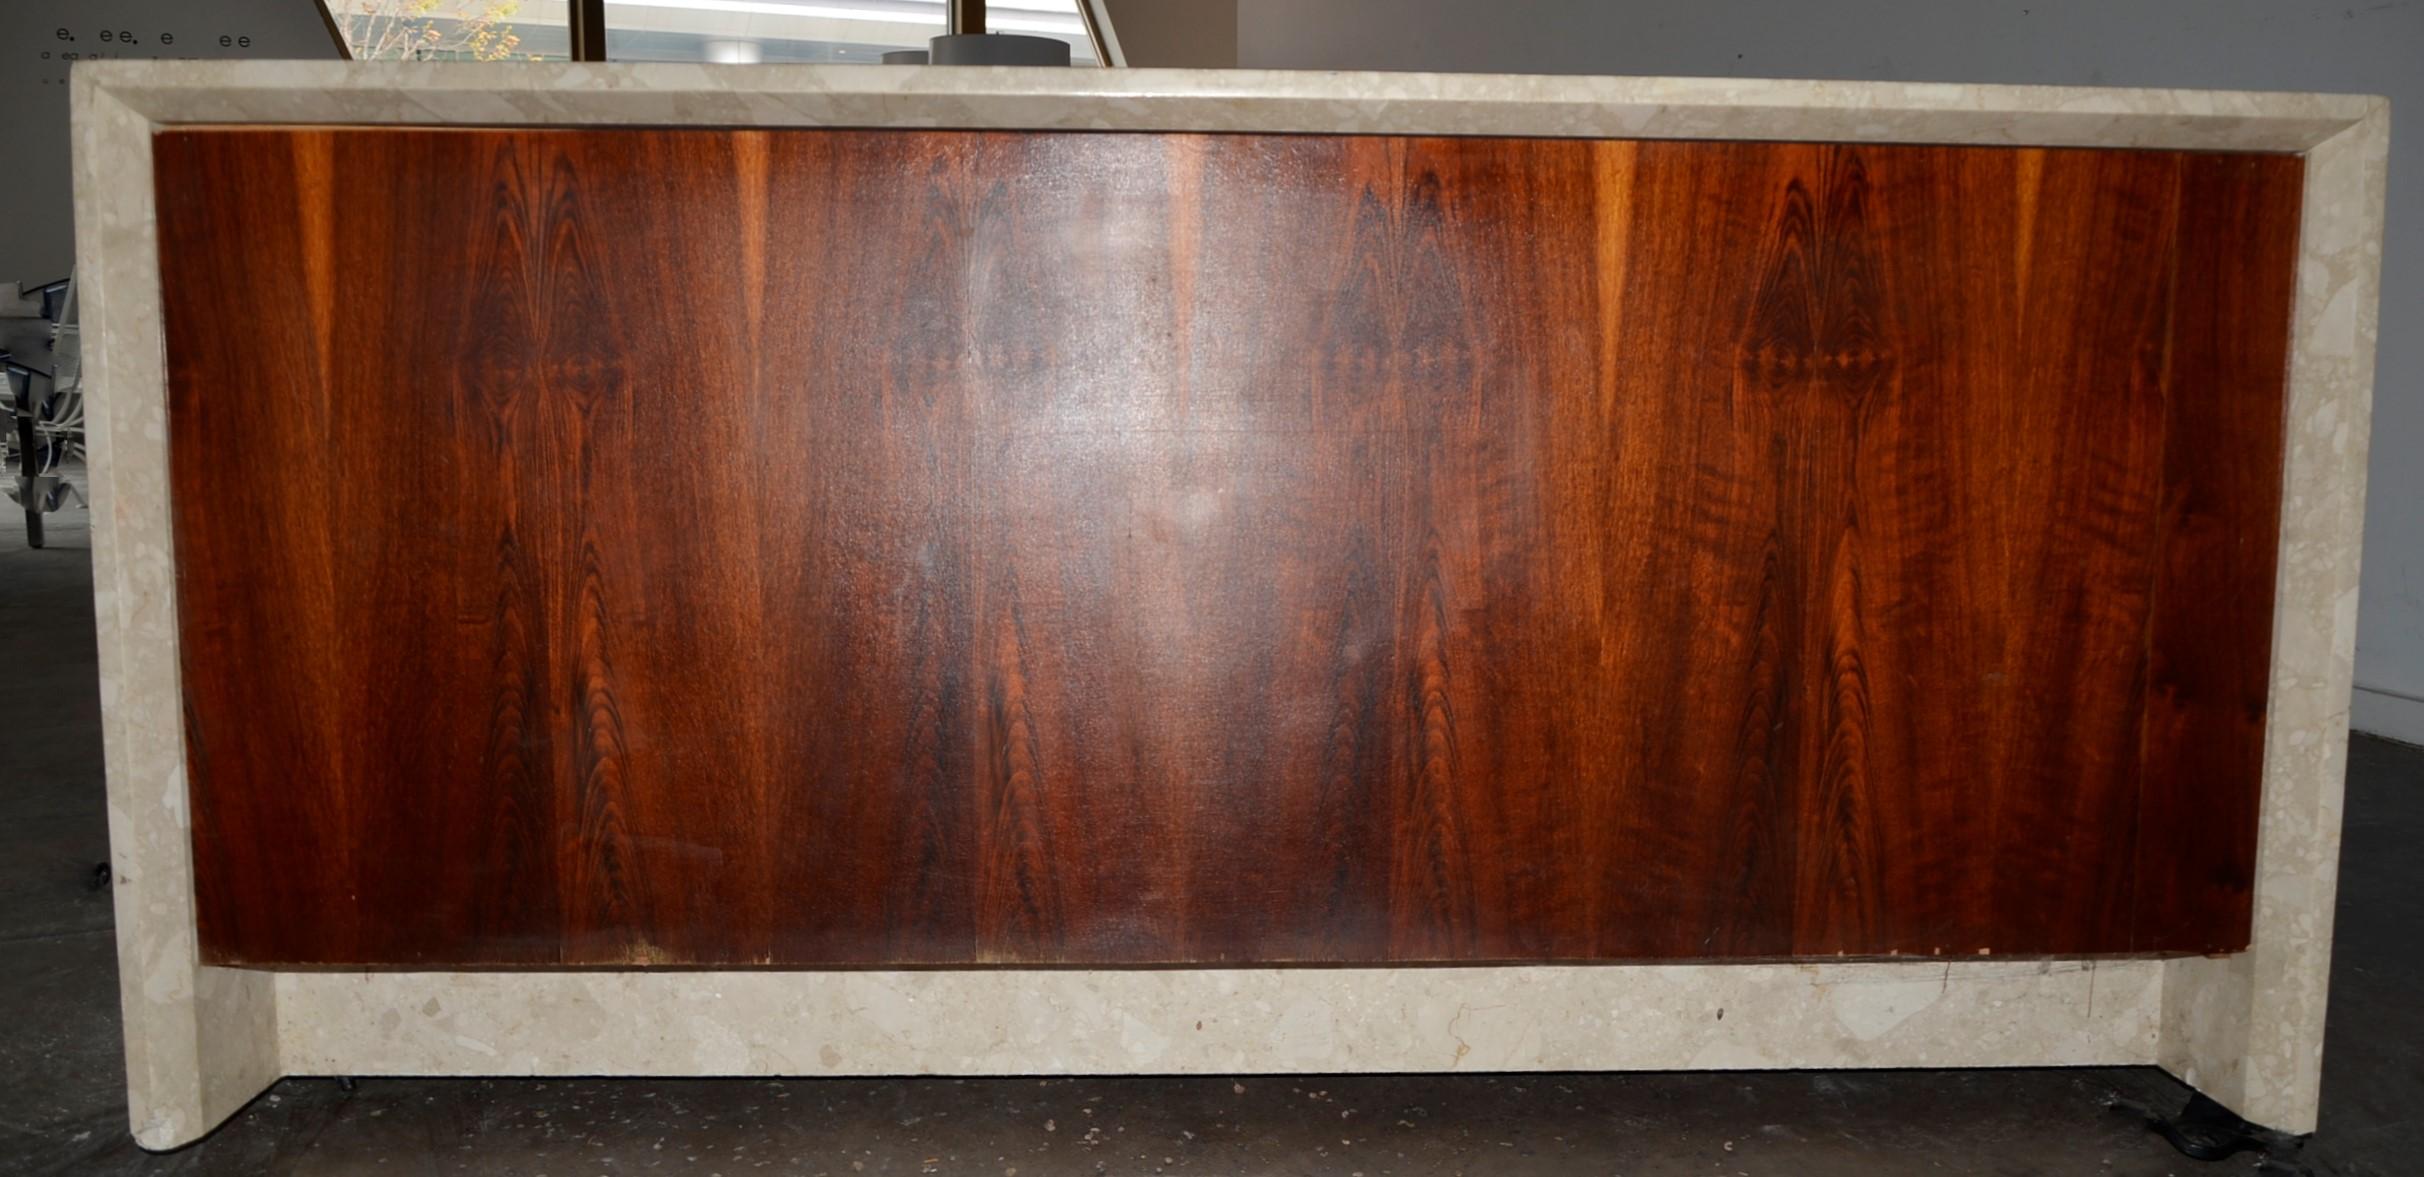 Polished White, Tan and Brown Travertine Marble and Rosewood Two-Sided Sideboard For Sale 11